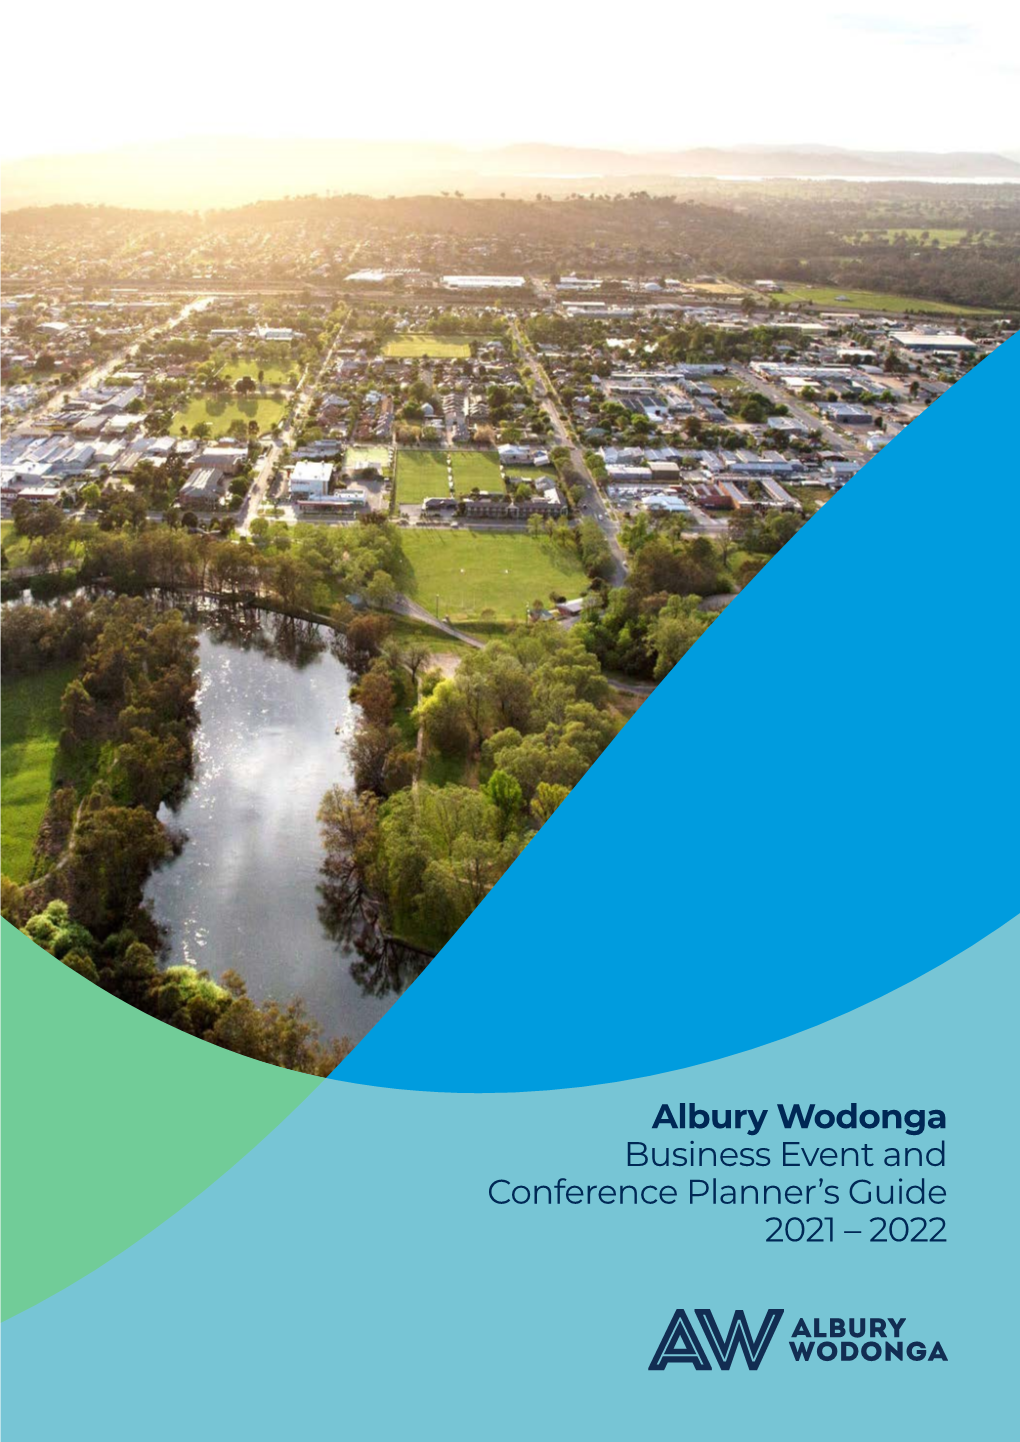 Albury Wodonga Business Event and Conference Planner's Guide 2021